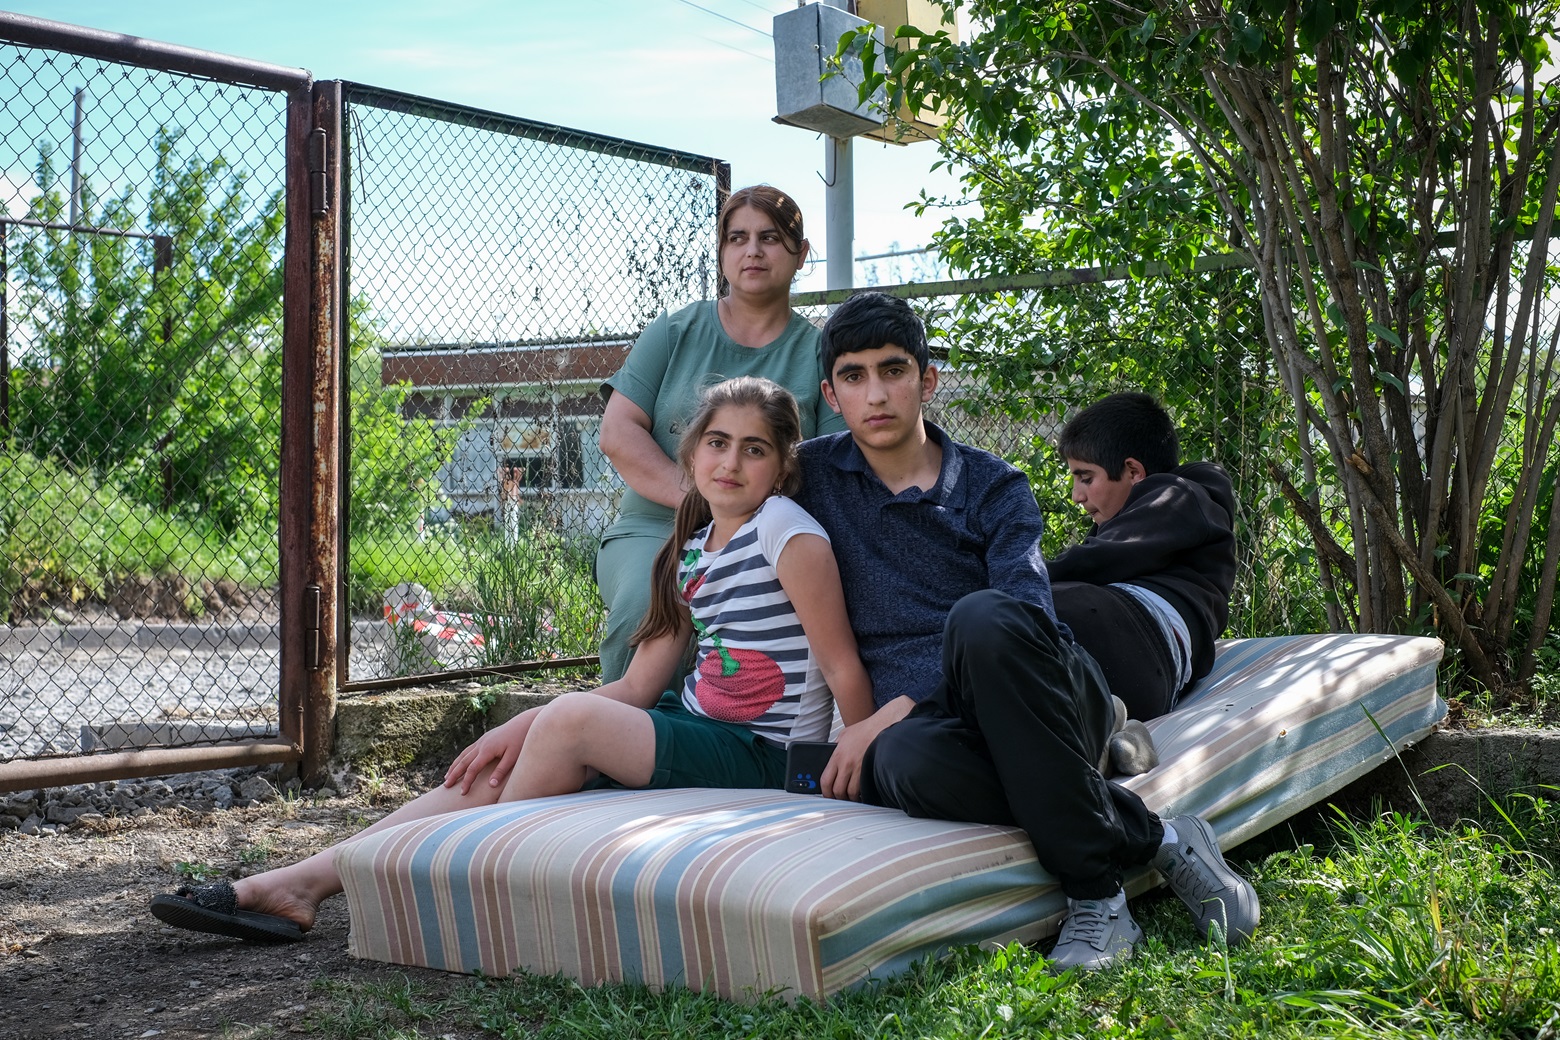 Portrait of a refugee family